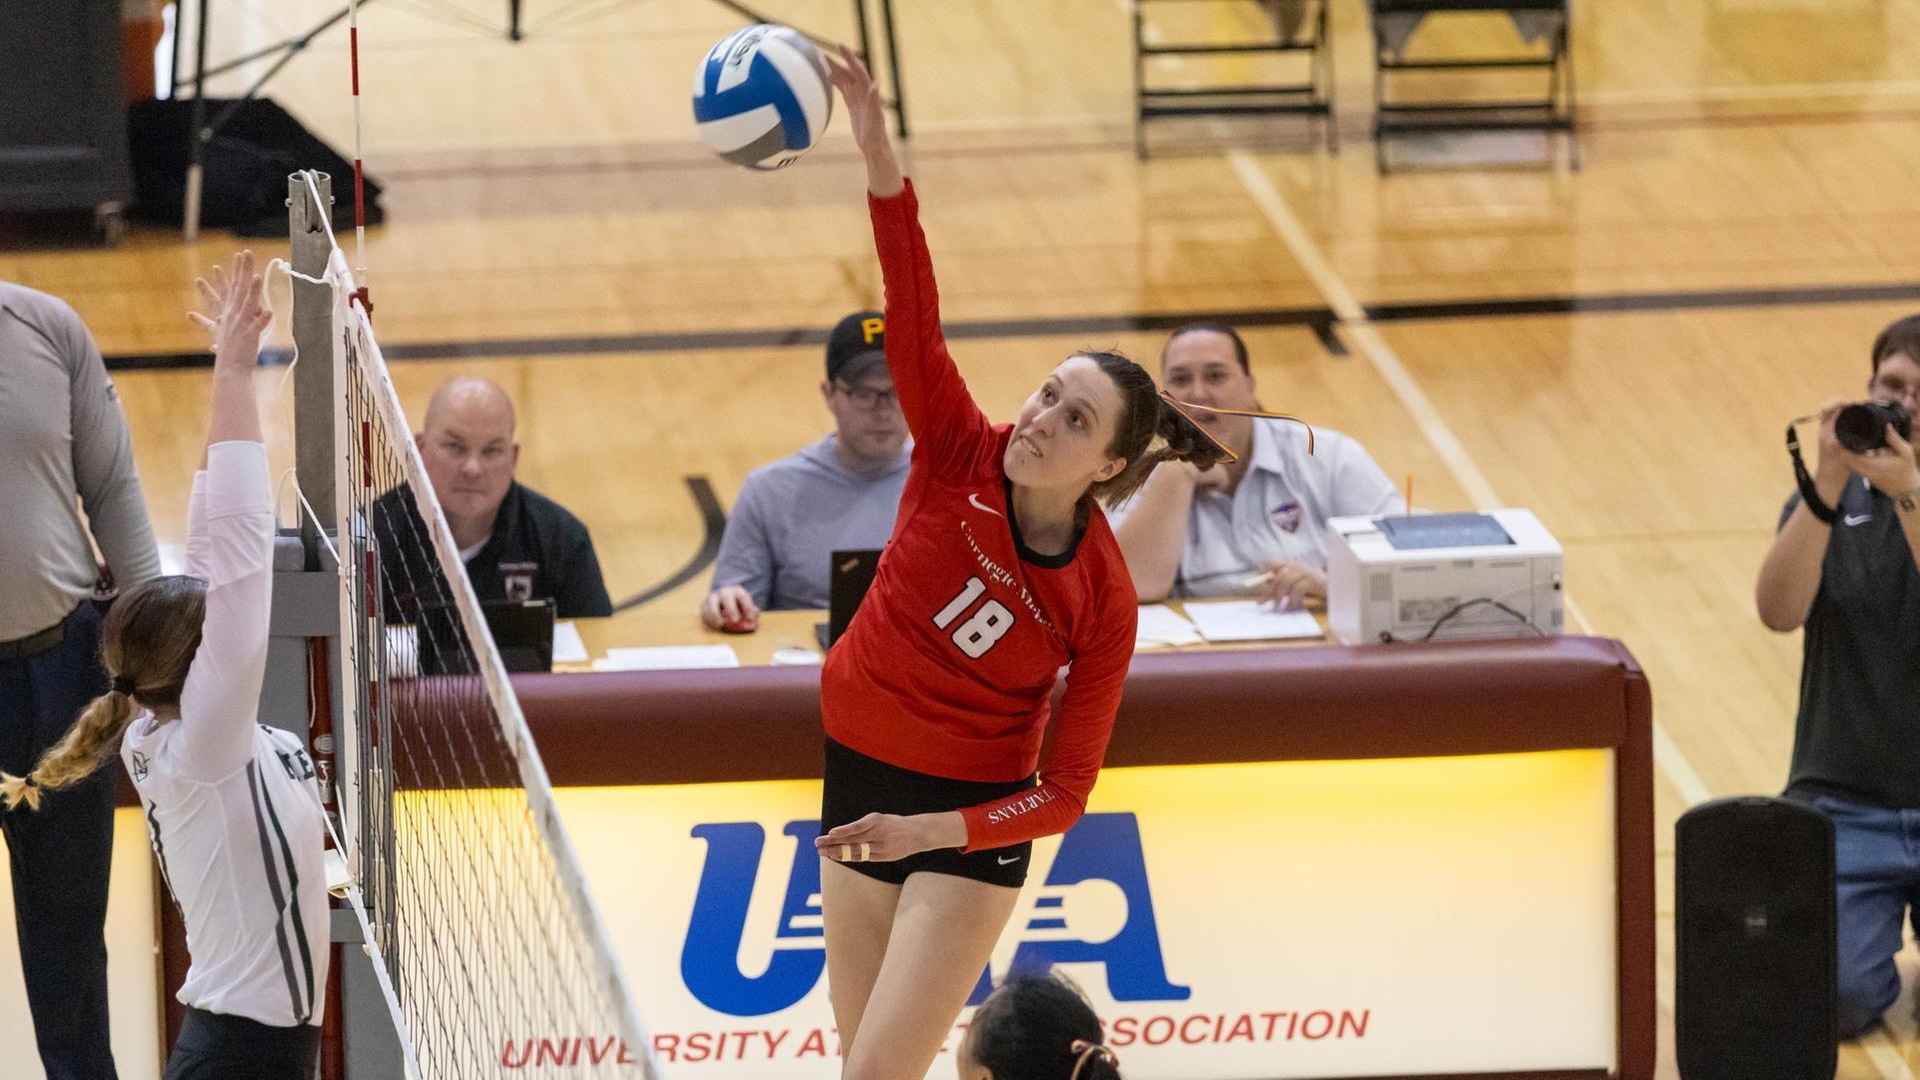 women's volleyball player wearing a red jersey makes contact with the ball with her right hand